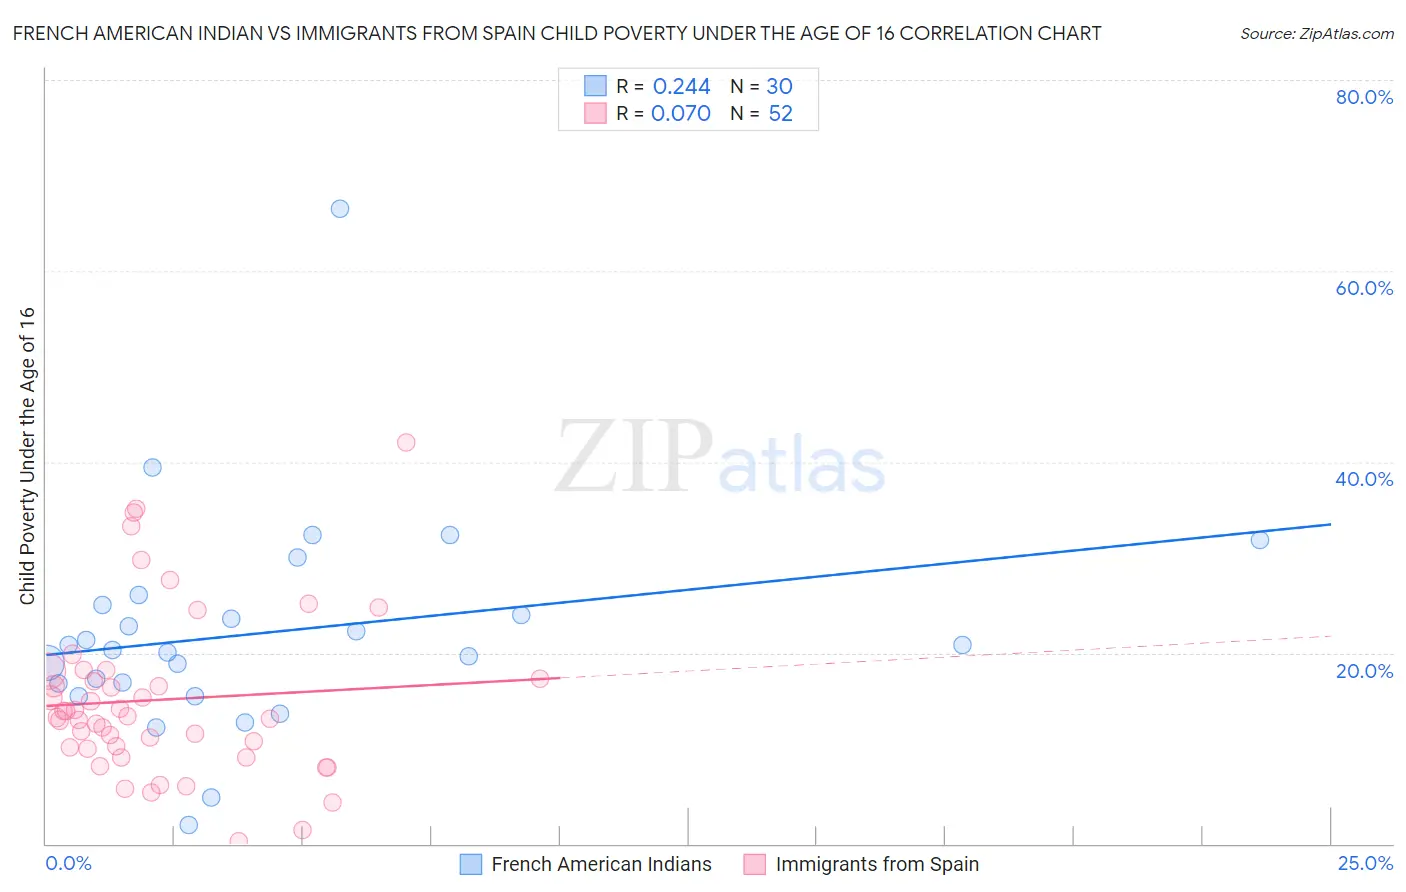 French American Indian vs Immigrants from Spain Child Poverty Under the Age of 16